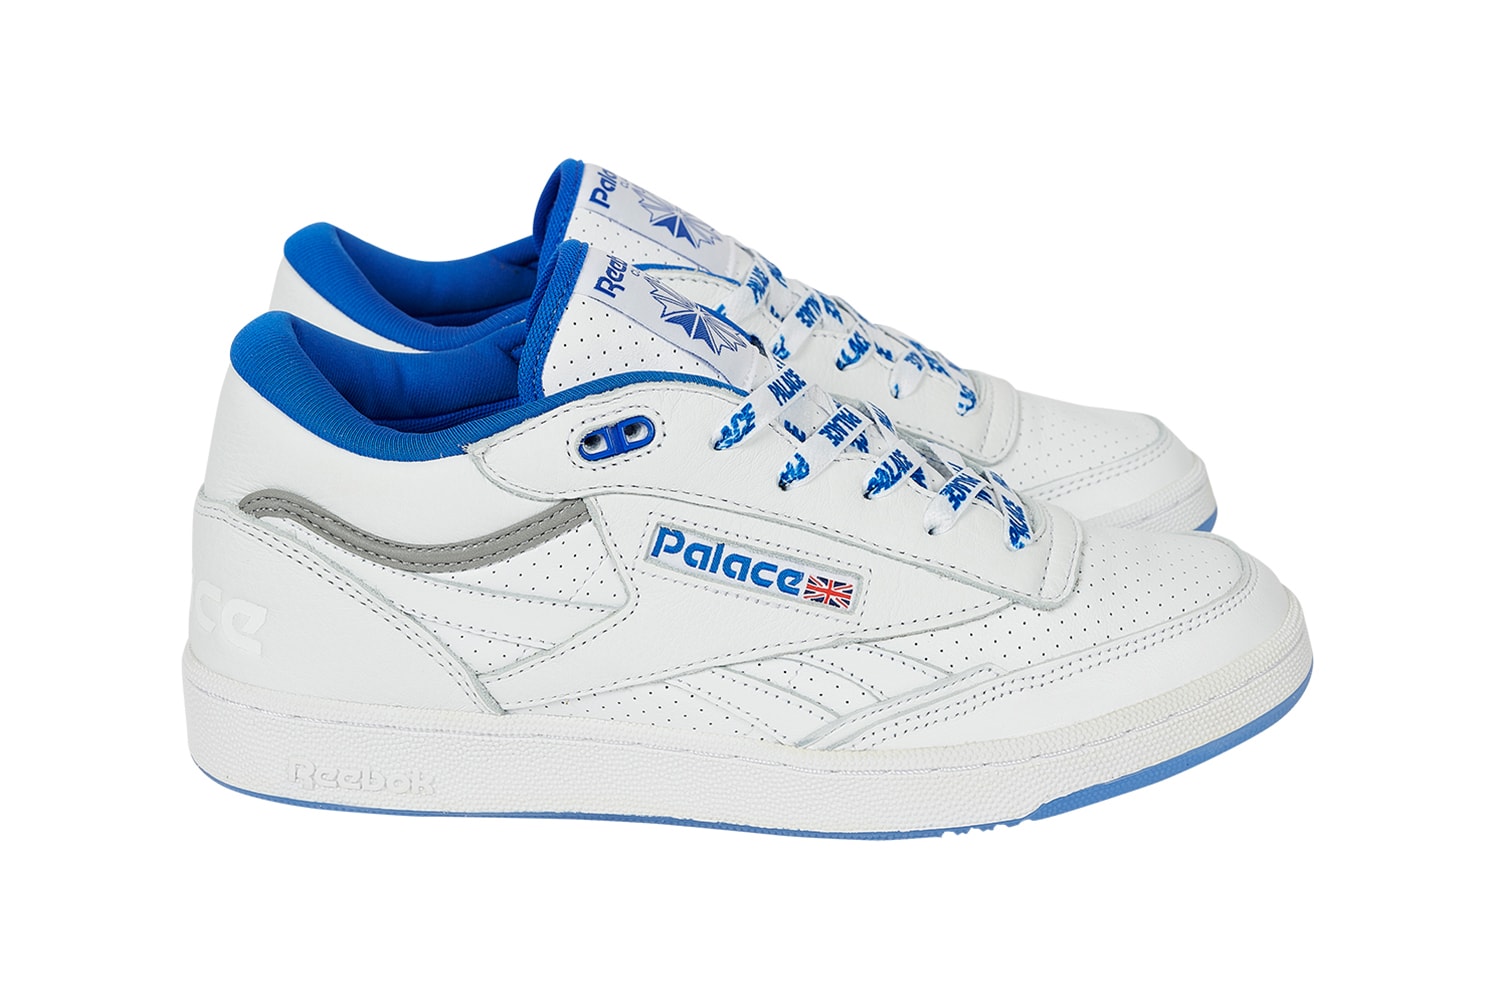 Palace Spring 2023 Collection Week 4 Drop Reebok Club C II Mid Revenge Collaboration Release Info Date Buy Price Club C II Mid Revenge classic white blue tan black neon yellow 